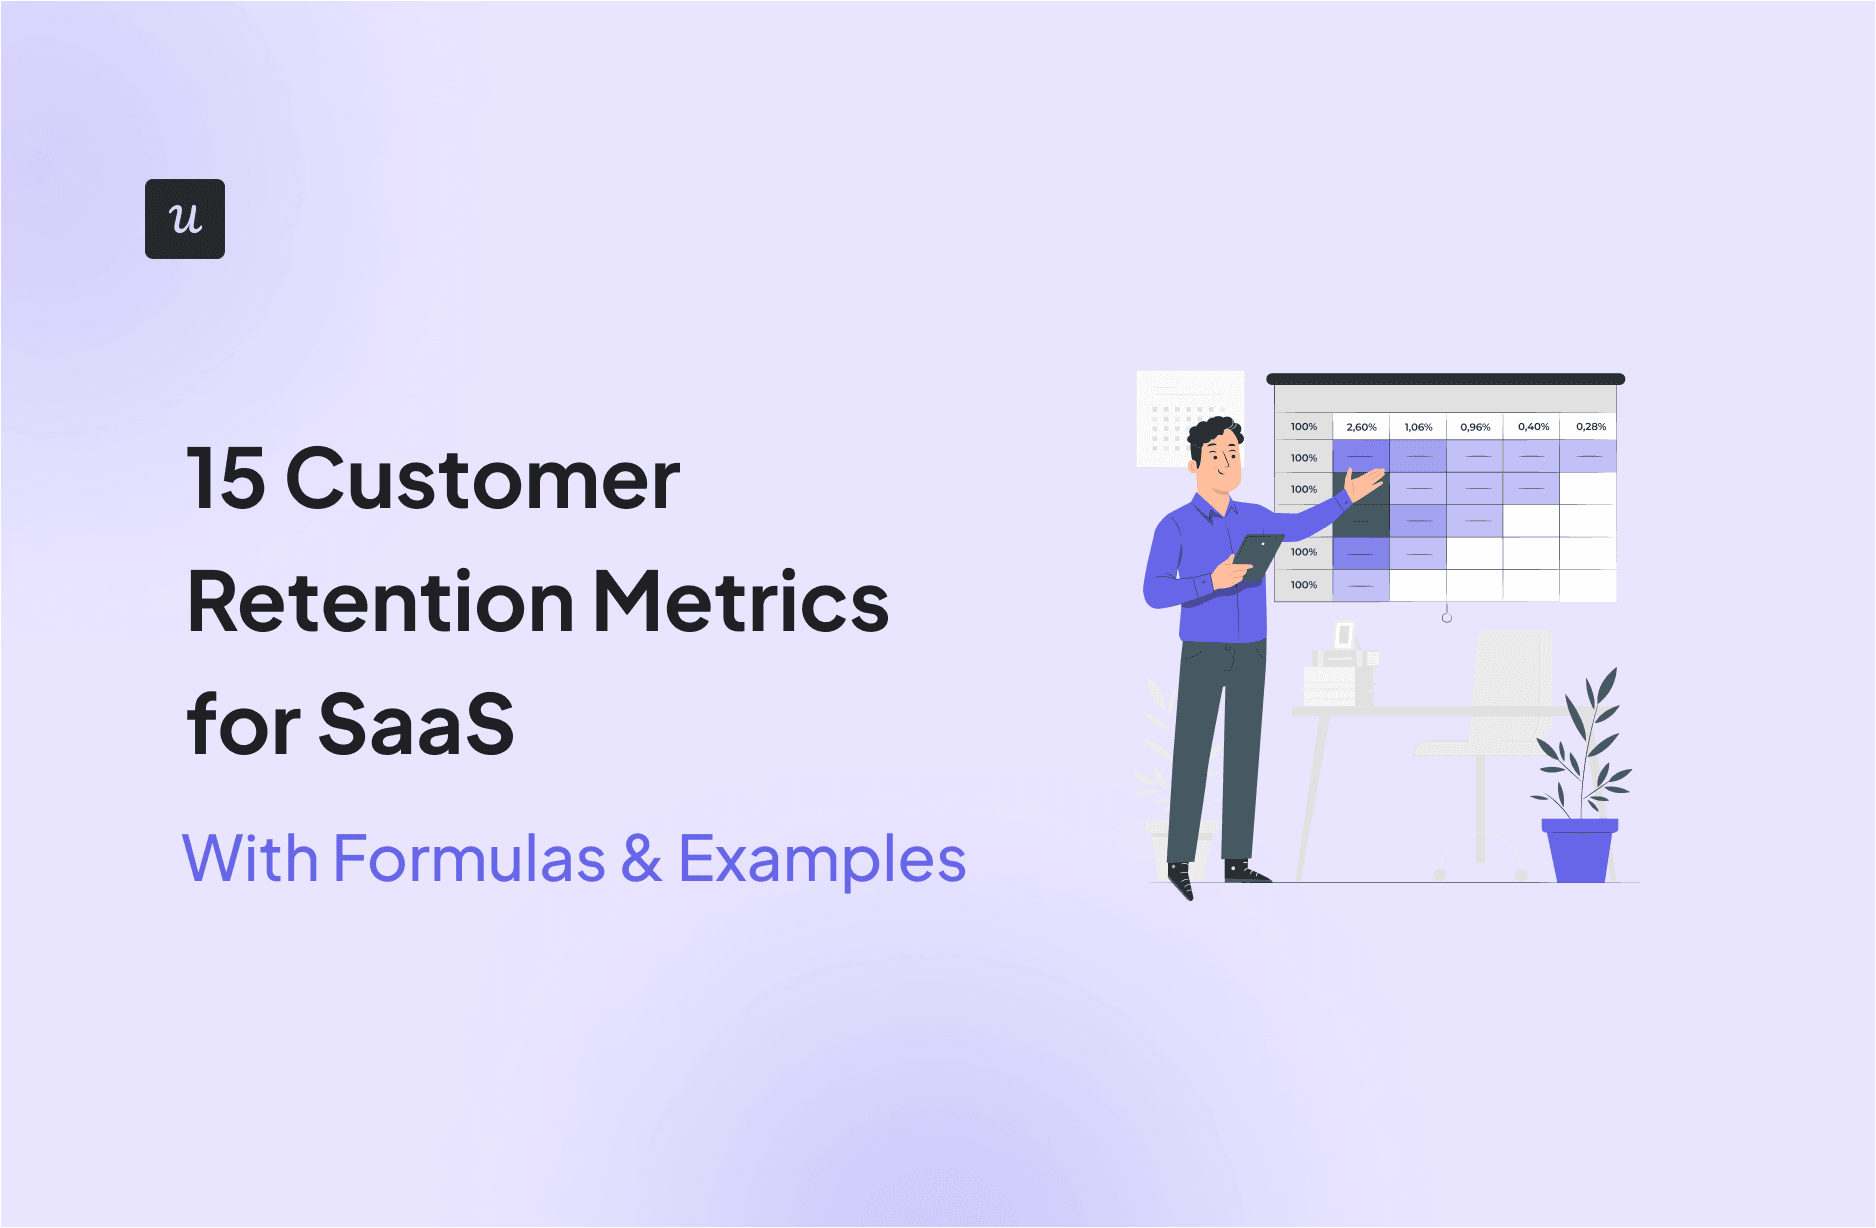 15 Customer Retention Metrics for SaaS [With Formulas & Examples] cover